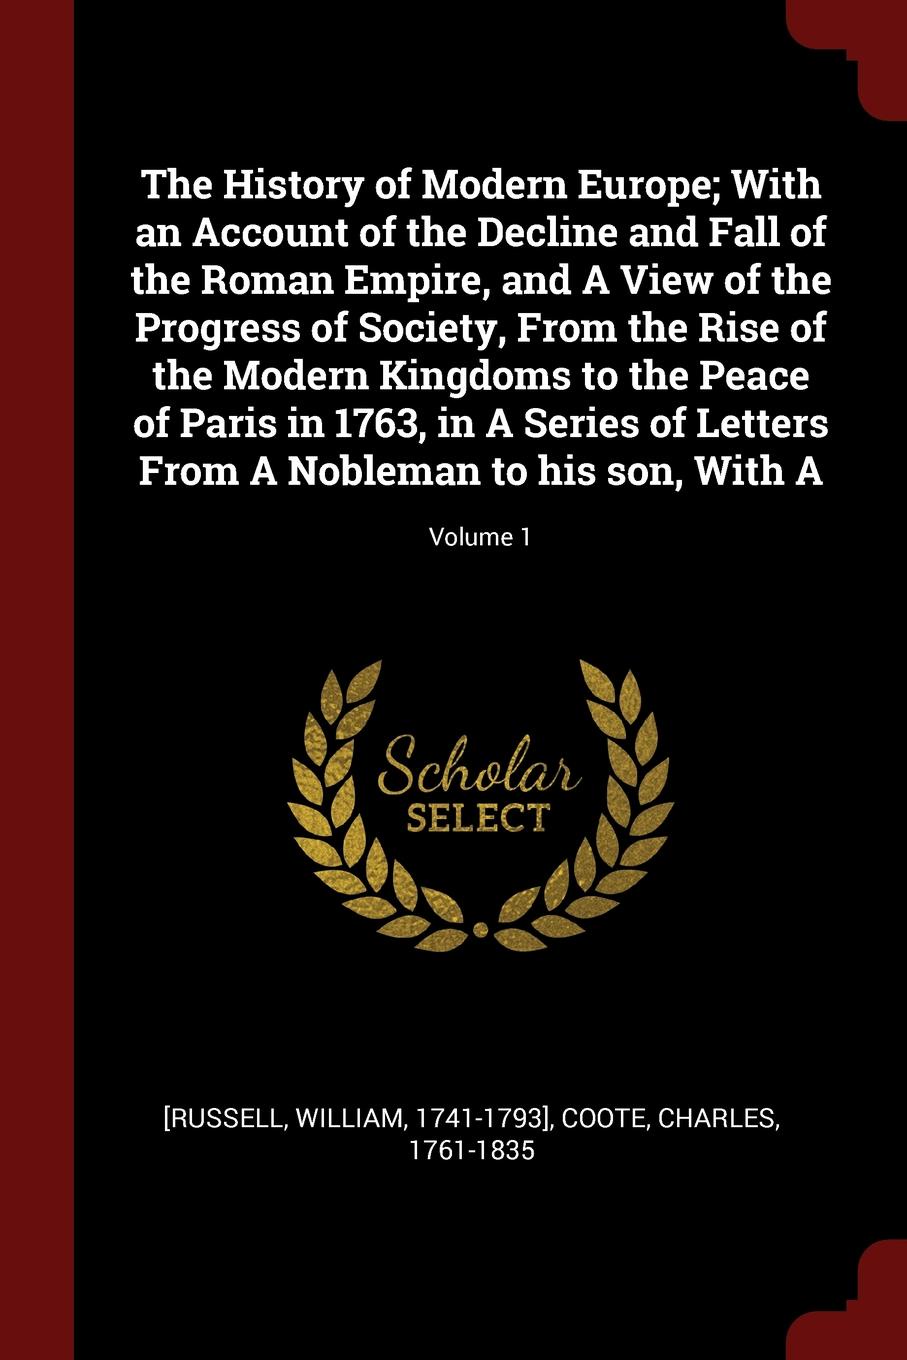 The History of Modern Europe; With an Account of the Decline and Fall of the Roman Empire, and A View of the Progress of Society, From the Rise of the Modern Kingdoms to the Peace of Paris in 1763, in A Series of Letters From A Nobleman to his son...